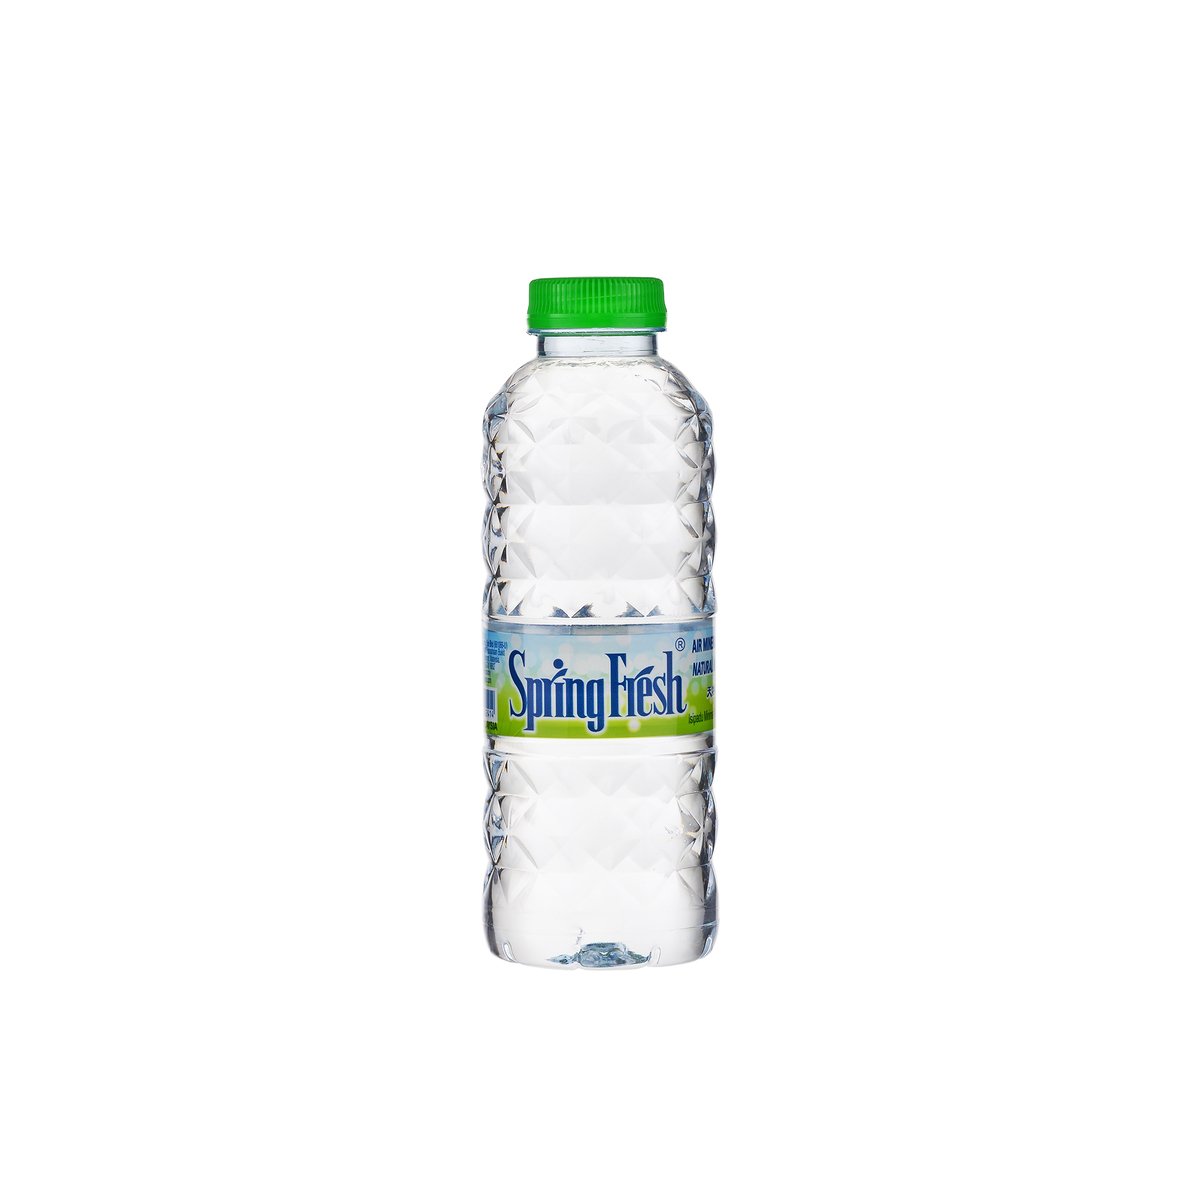 Spring Fresh Mineral Water 300ml